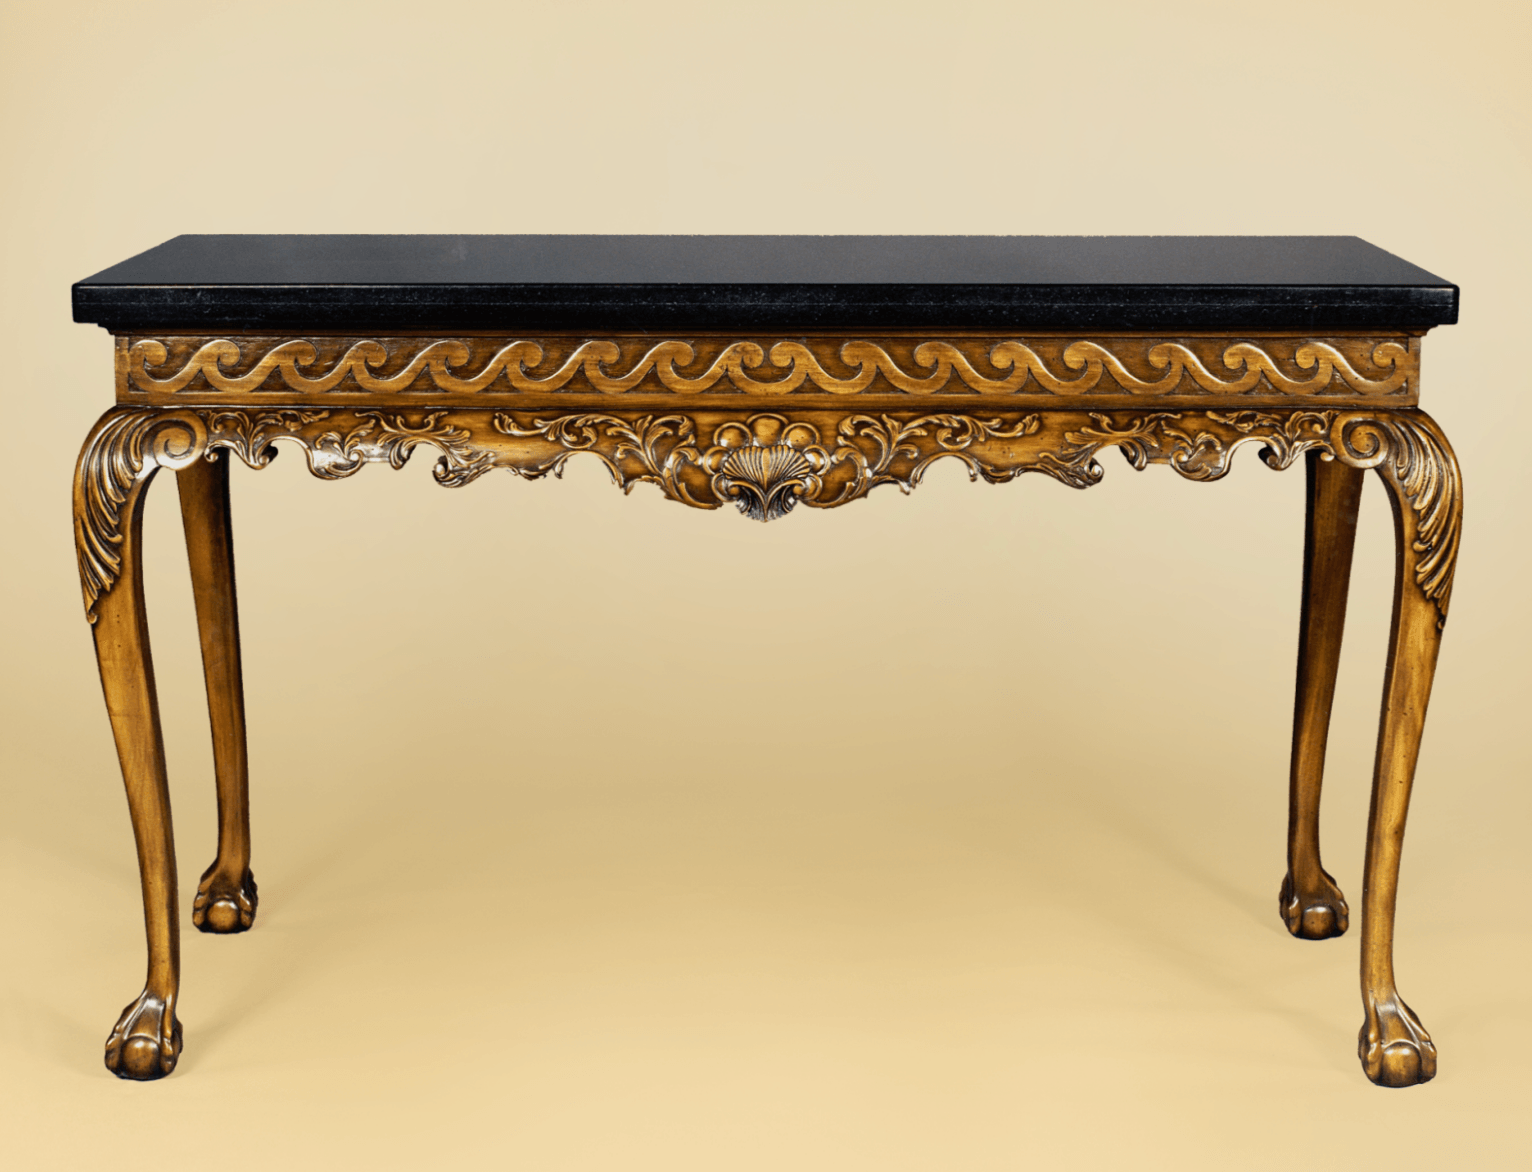 GREEKWAVE CHIPPENDALE CONSOLE TABLE - House of Chippendale